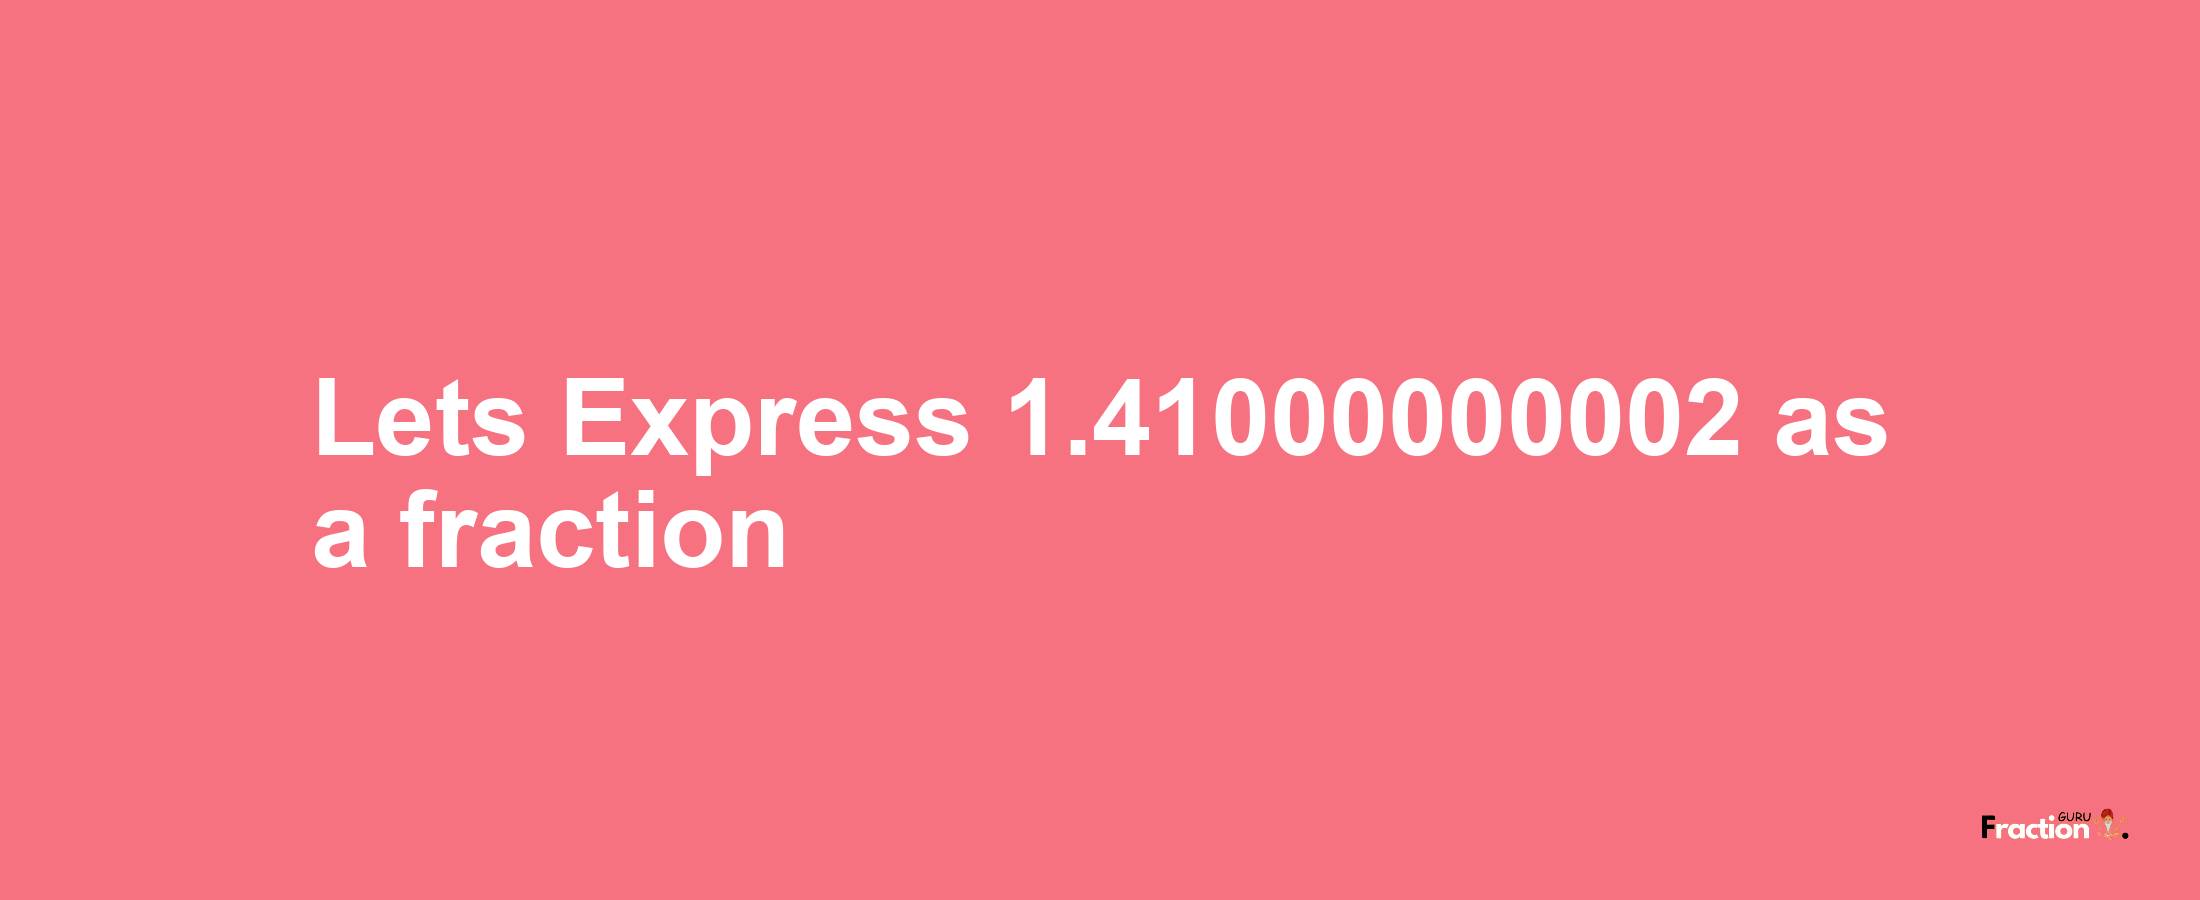 Lets Express 1.41000000002 as afraction